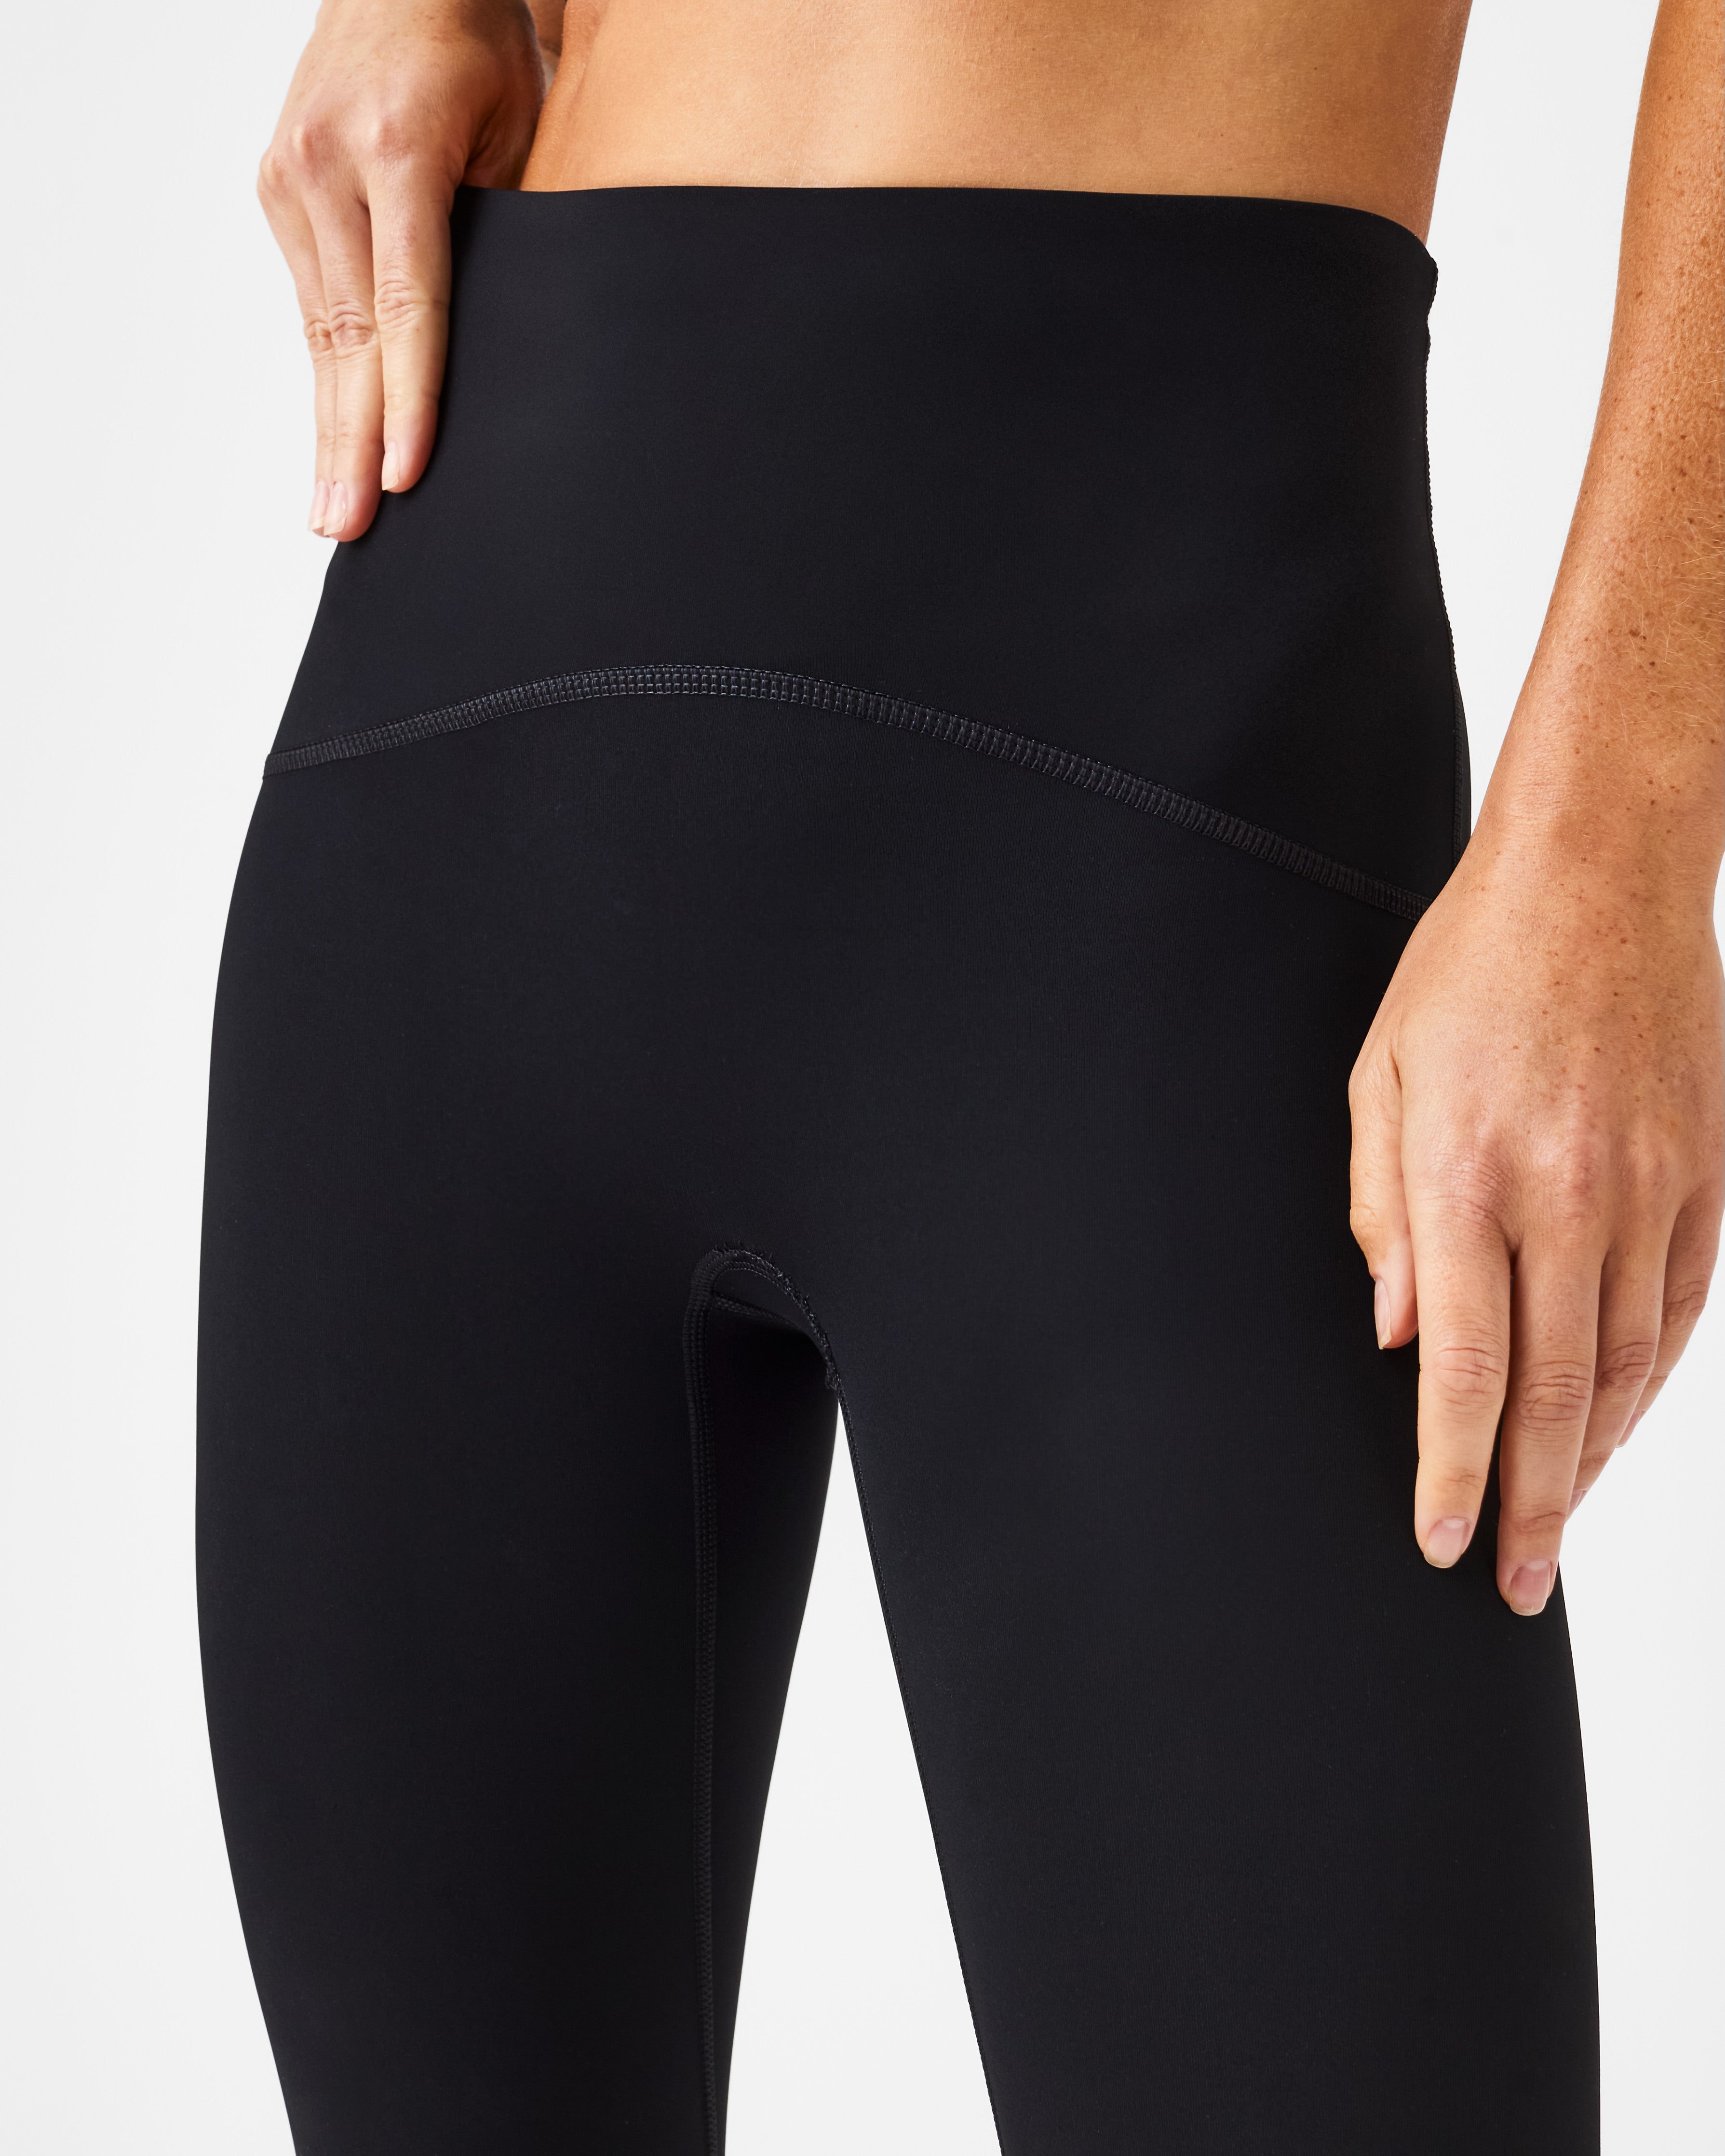 Women's FLX Performance High-Waisted 7/8 Leggings with Side Pockets